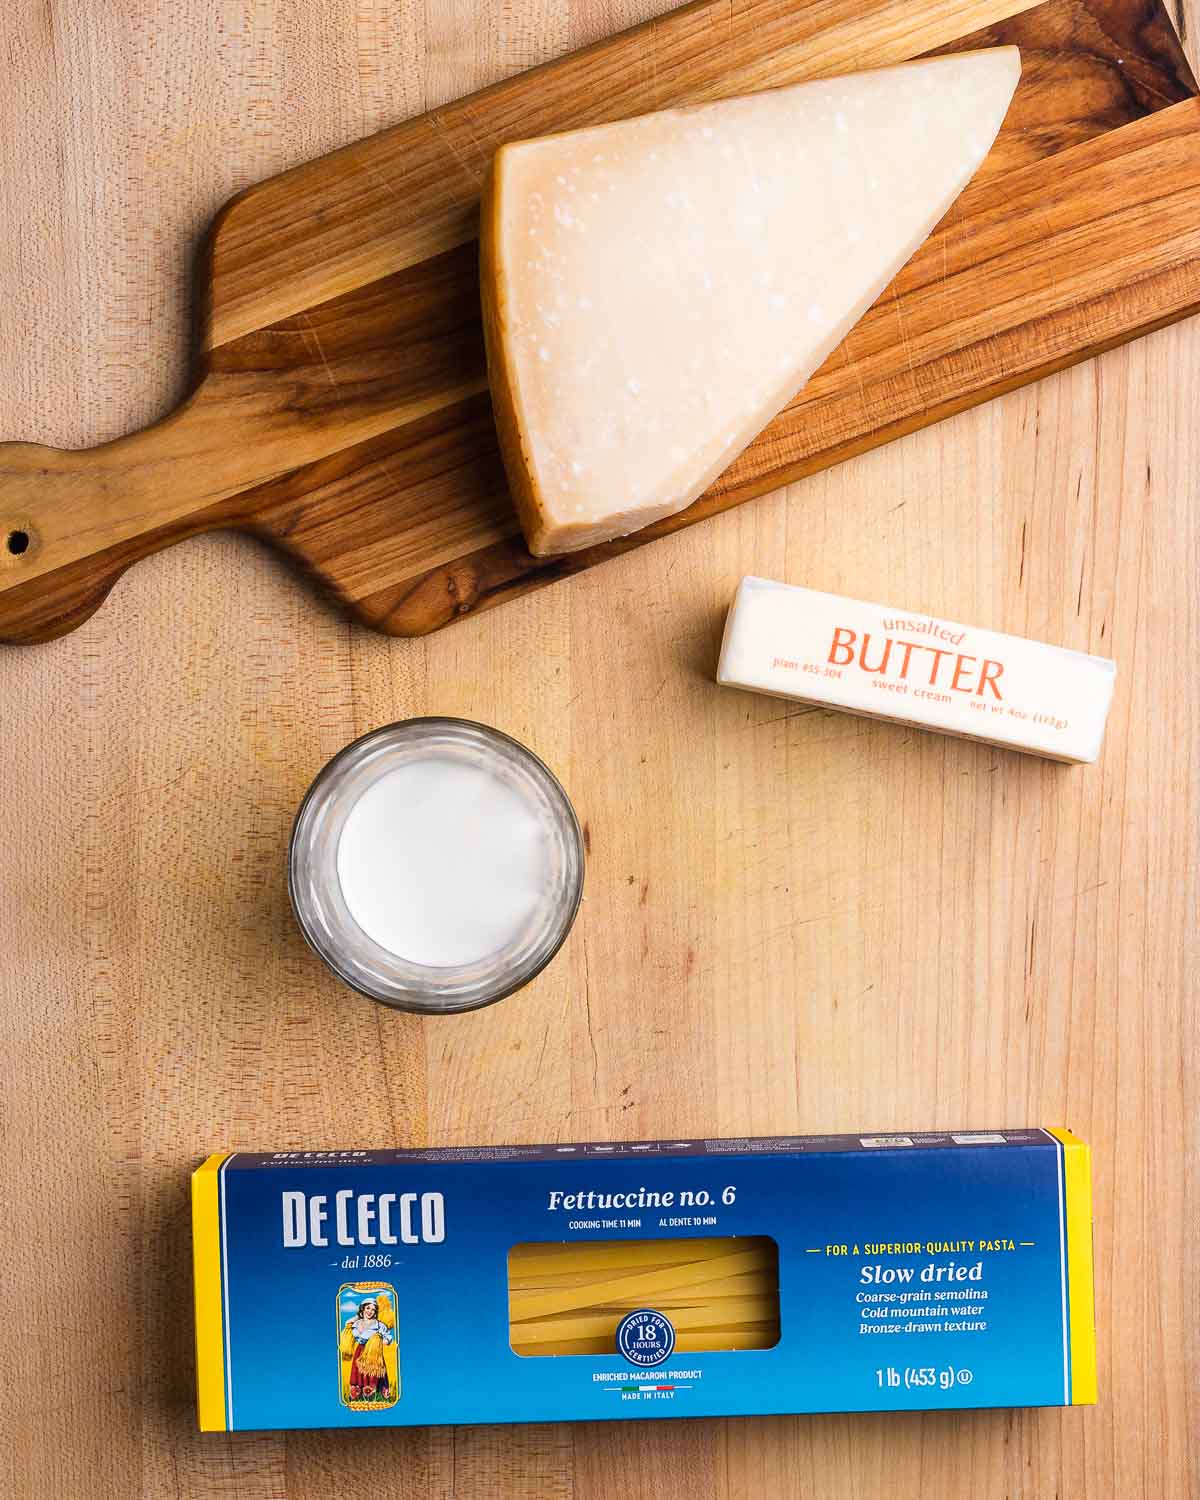 Ingredients shown: Parmigiano Reggiano, cream, butter, and fettuccine.